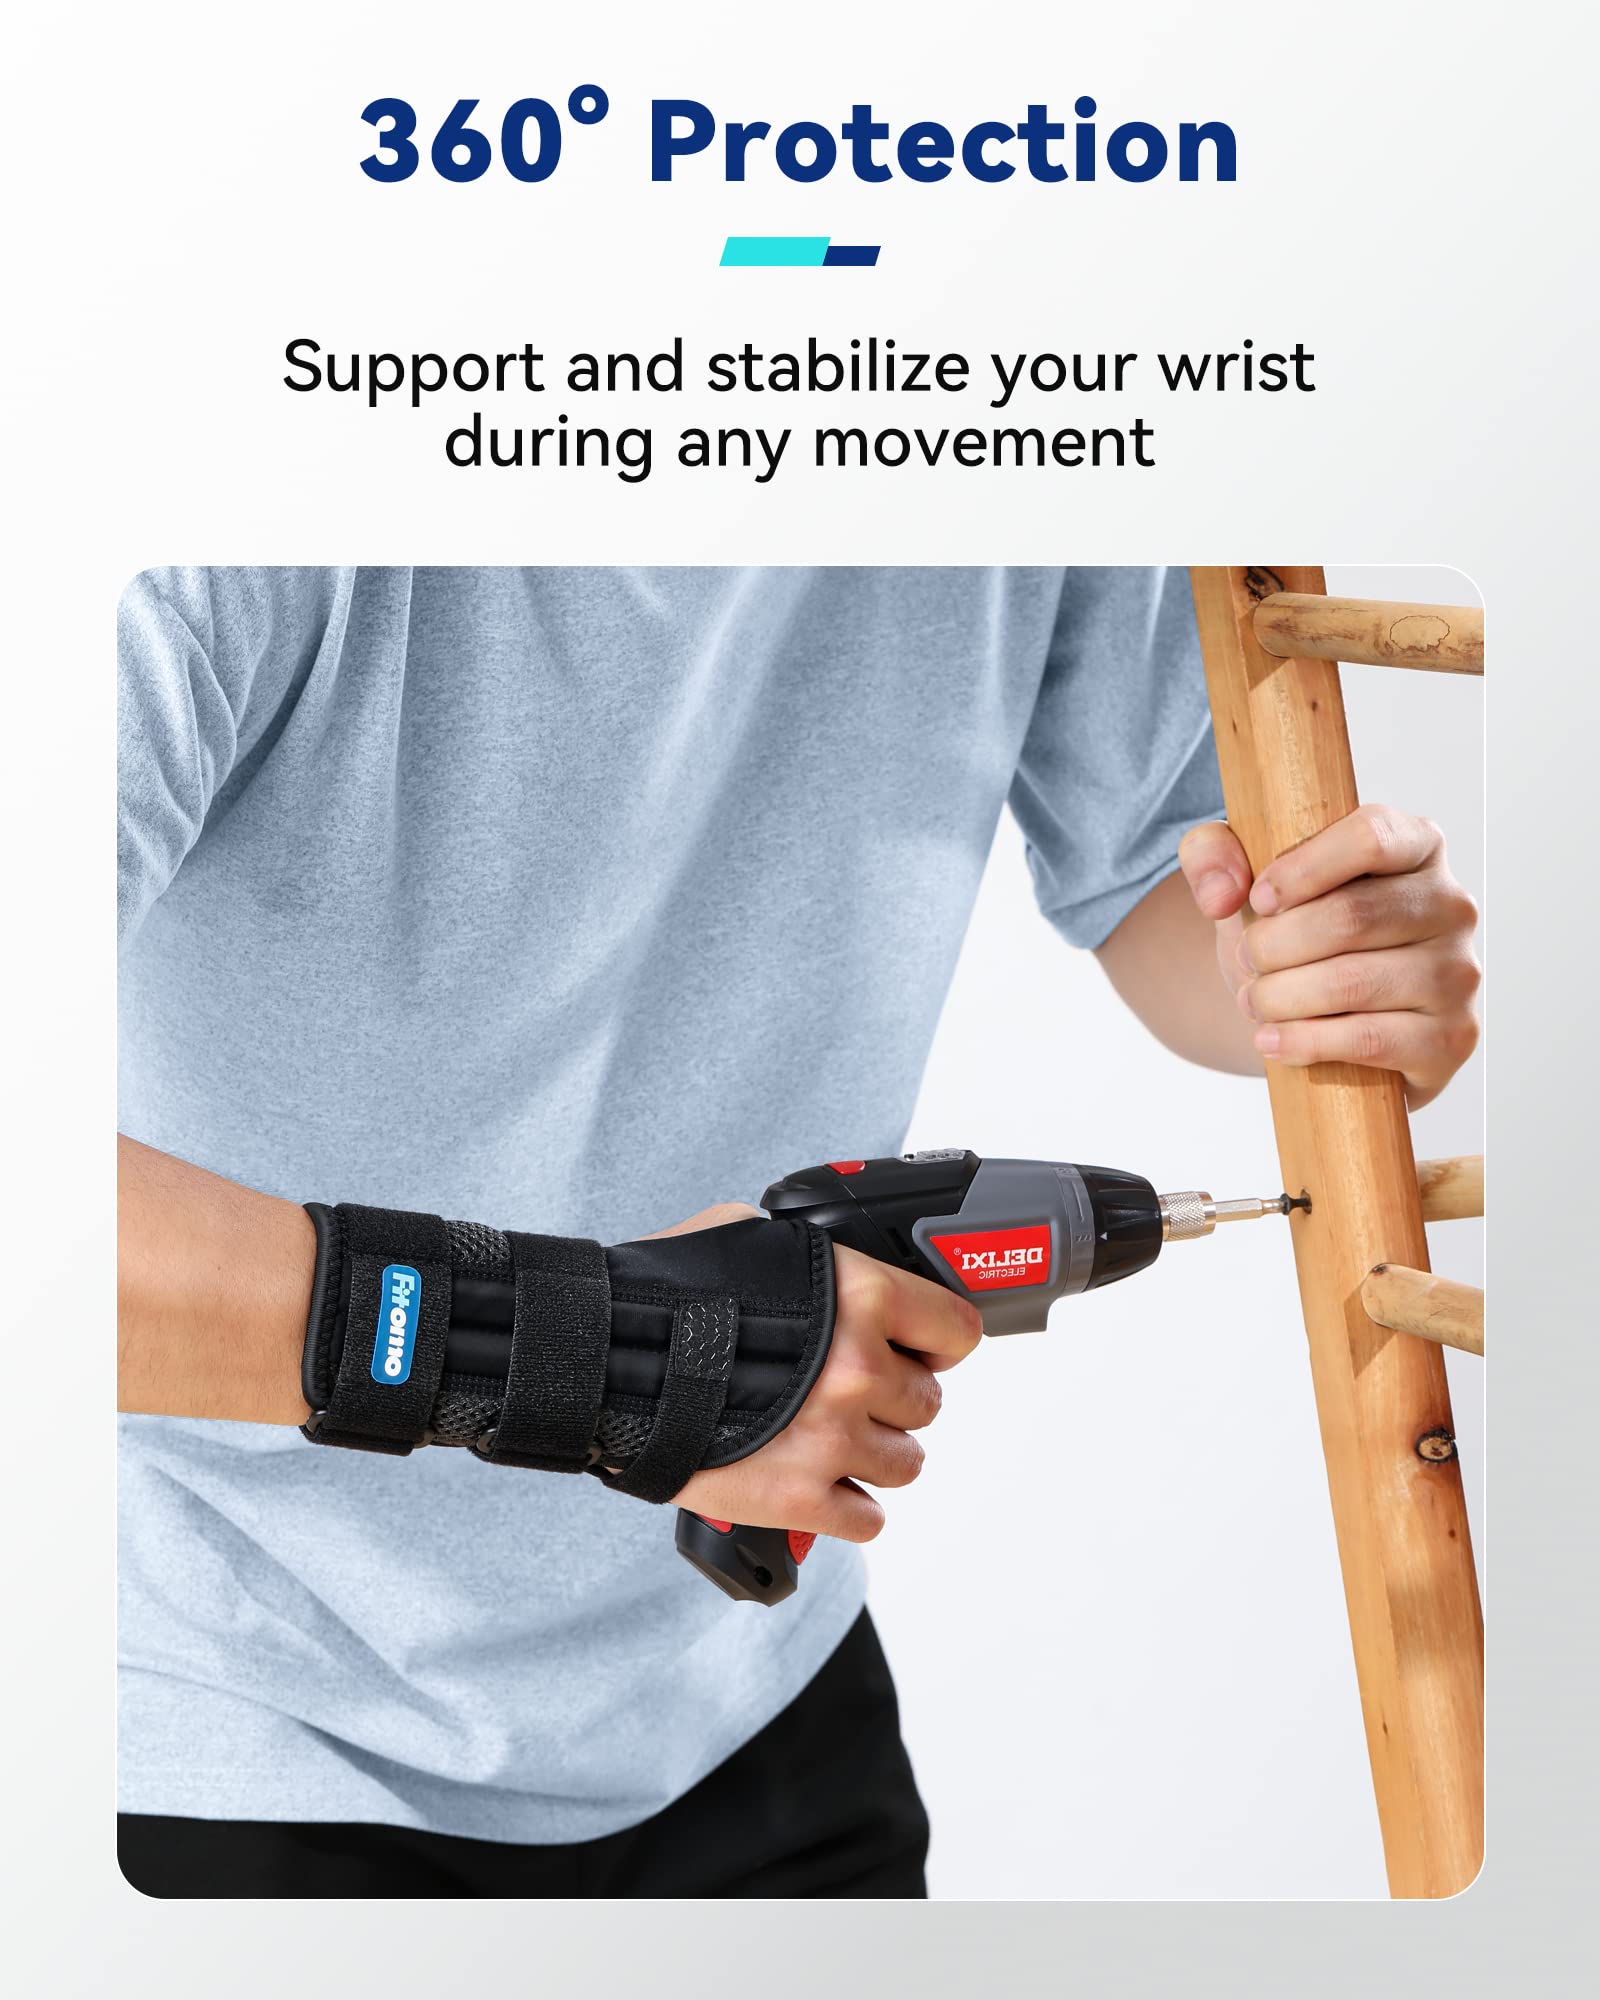 Fitomo Wrist Support with 3 Metal Splints and Soft Thumb Opening, Wrist Splint for Carpal Tunnel Arthritis Tendonitis Sprains, Hand Splint for Night Support Sleeping, 1 Unit, Right Hand